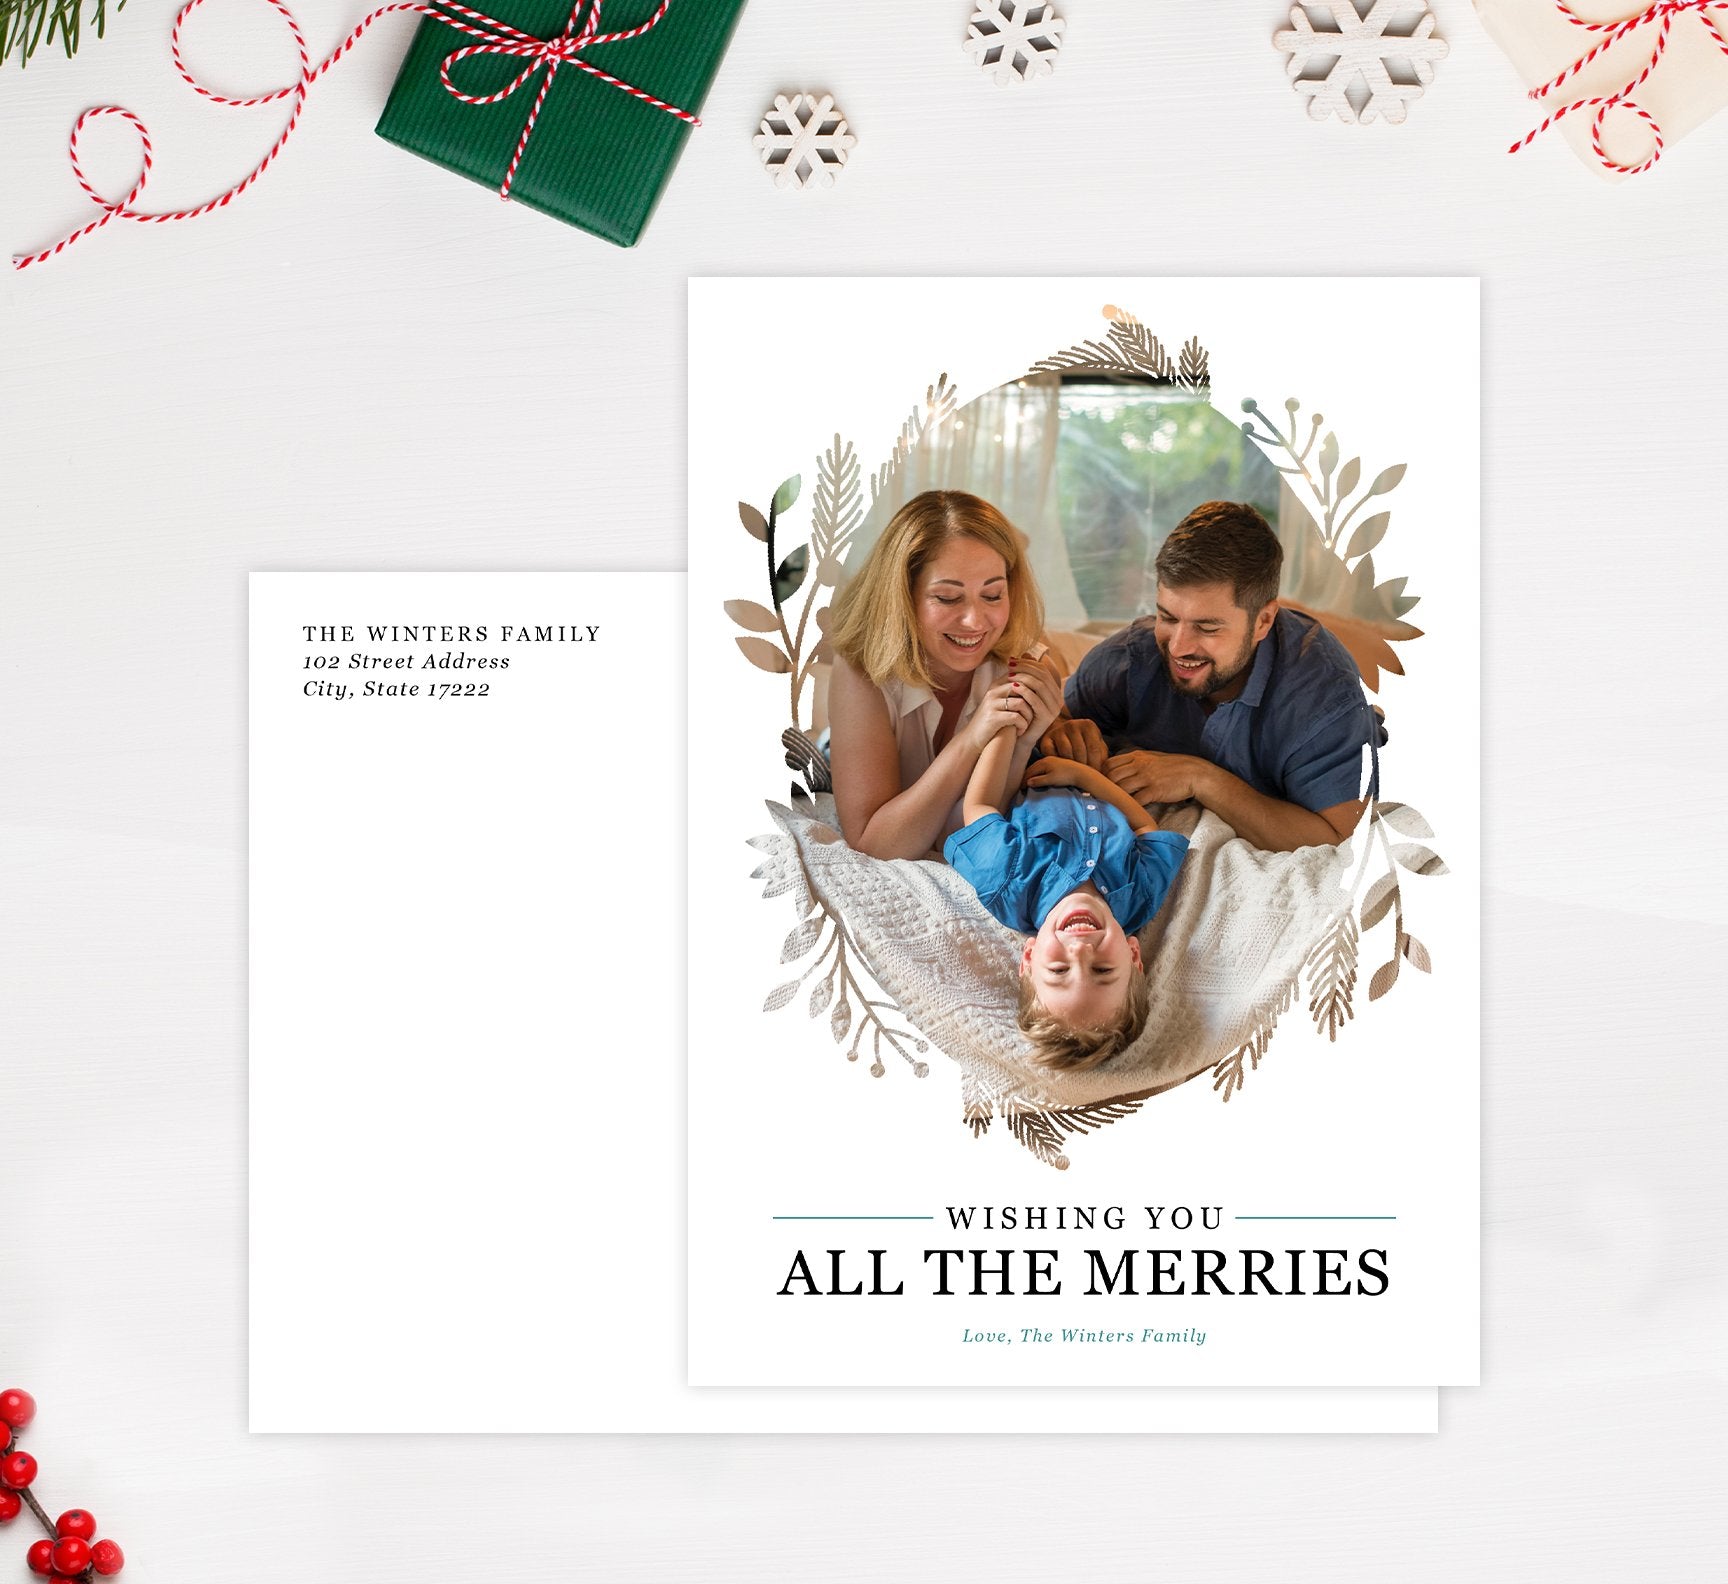 All the Merries Holiday Card Mockup; Holiday card with envelope and return address printed on it. 